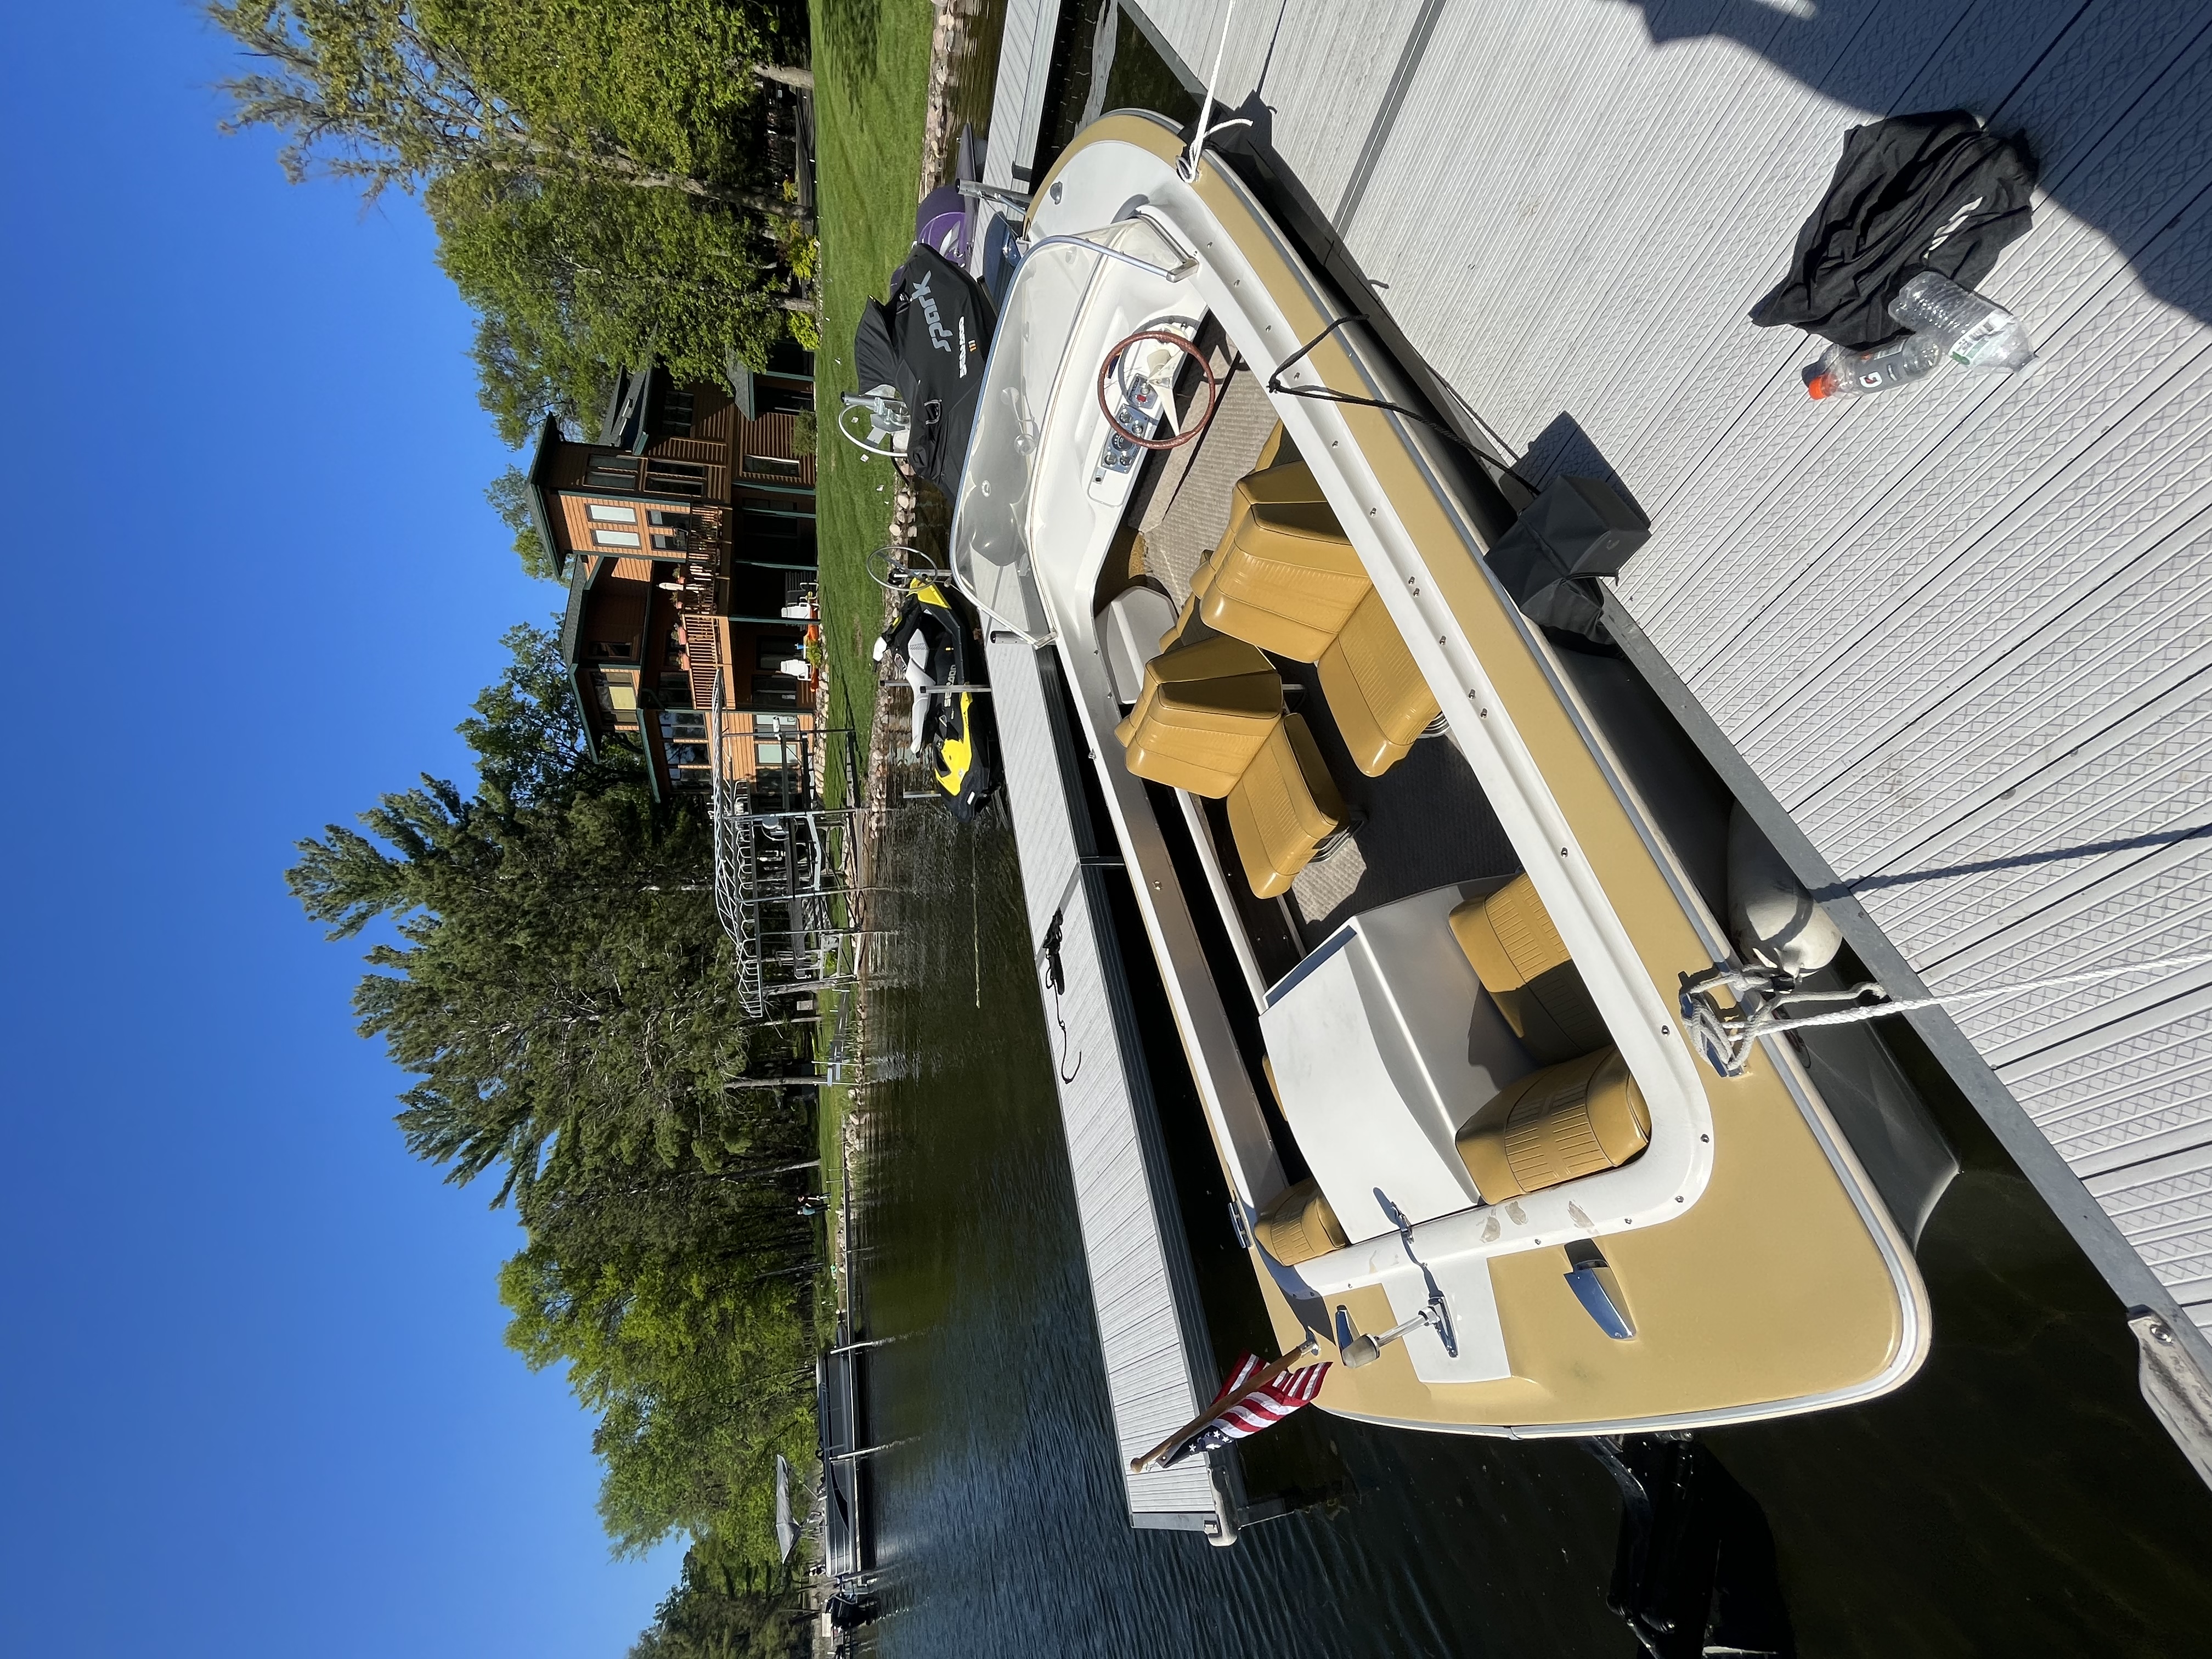 1966 17 foot Larson All American  Small boat for sale in Crosslake, MN - image 1 